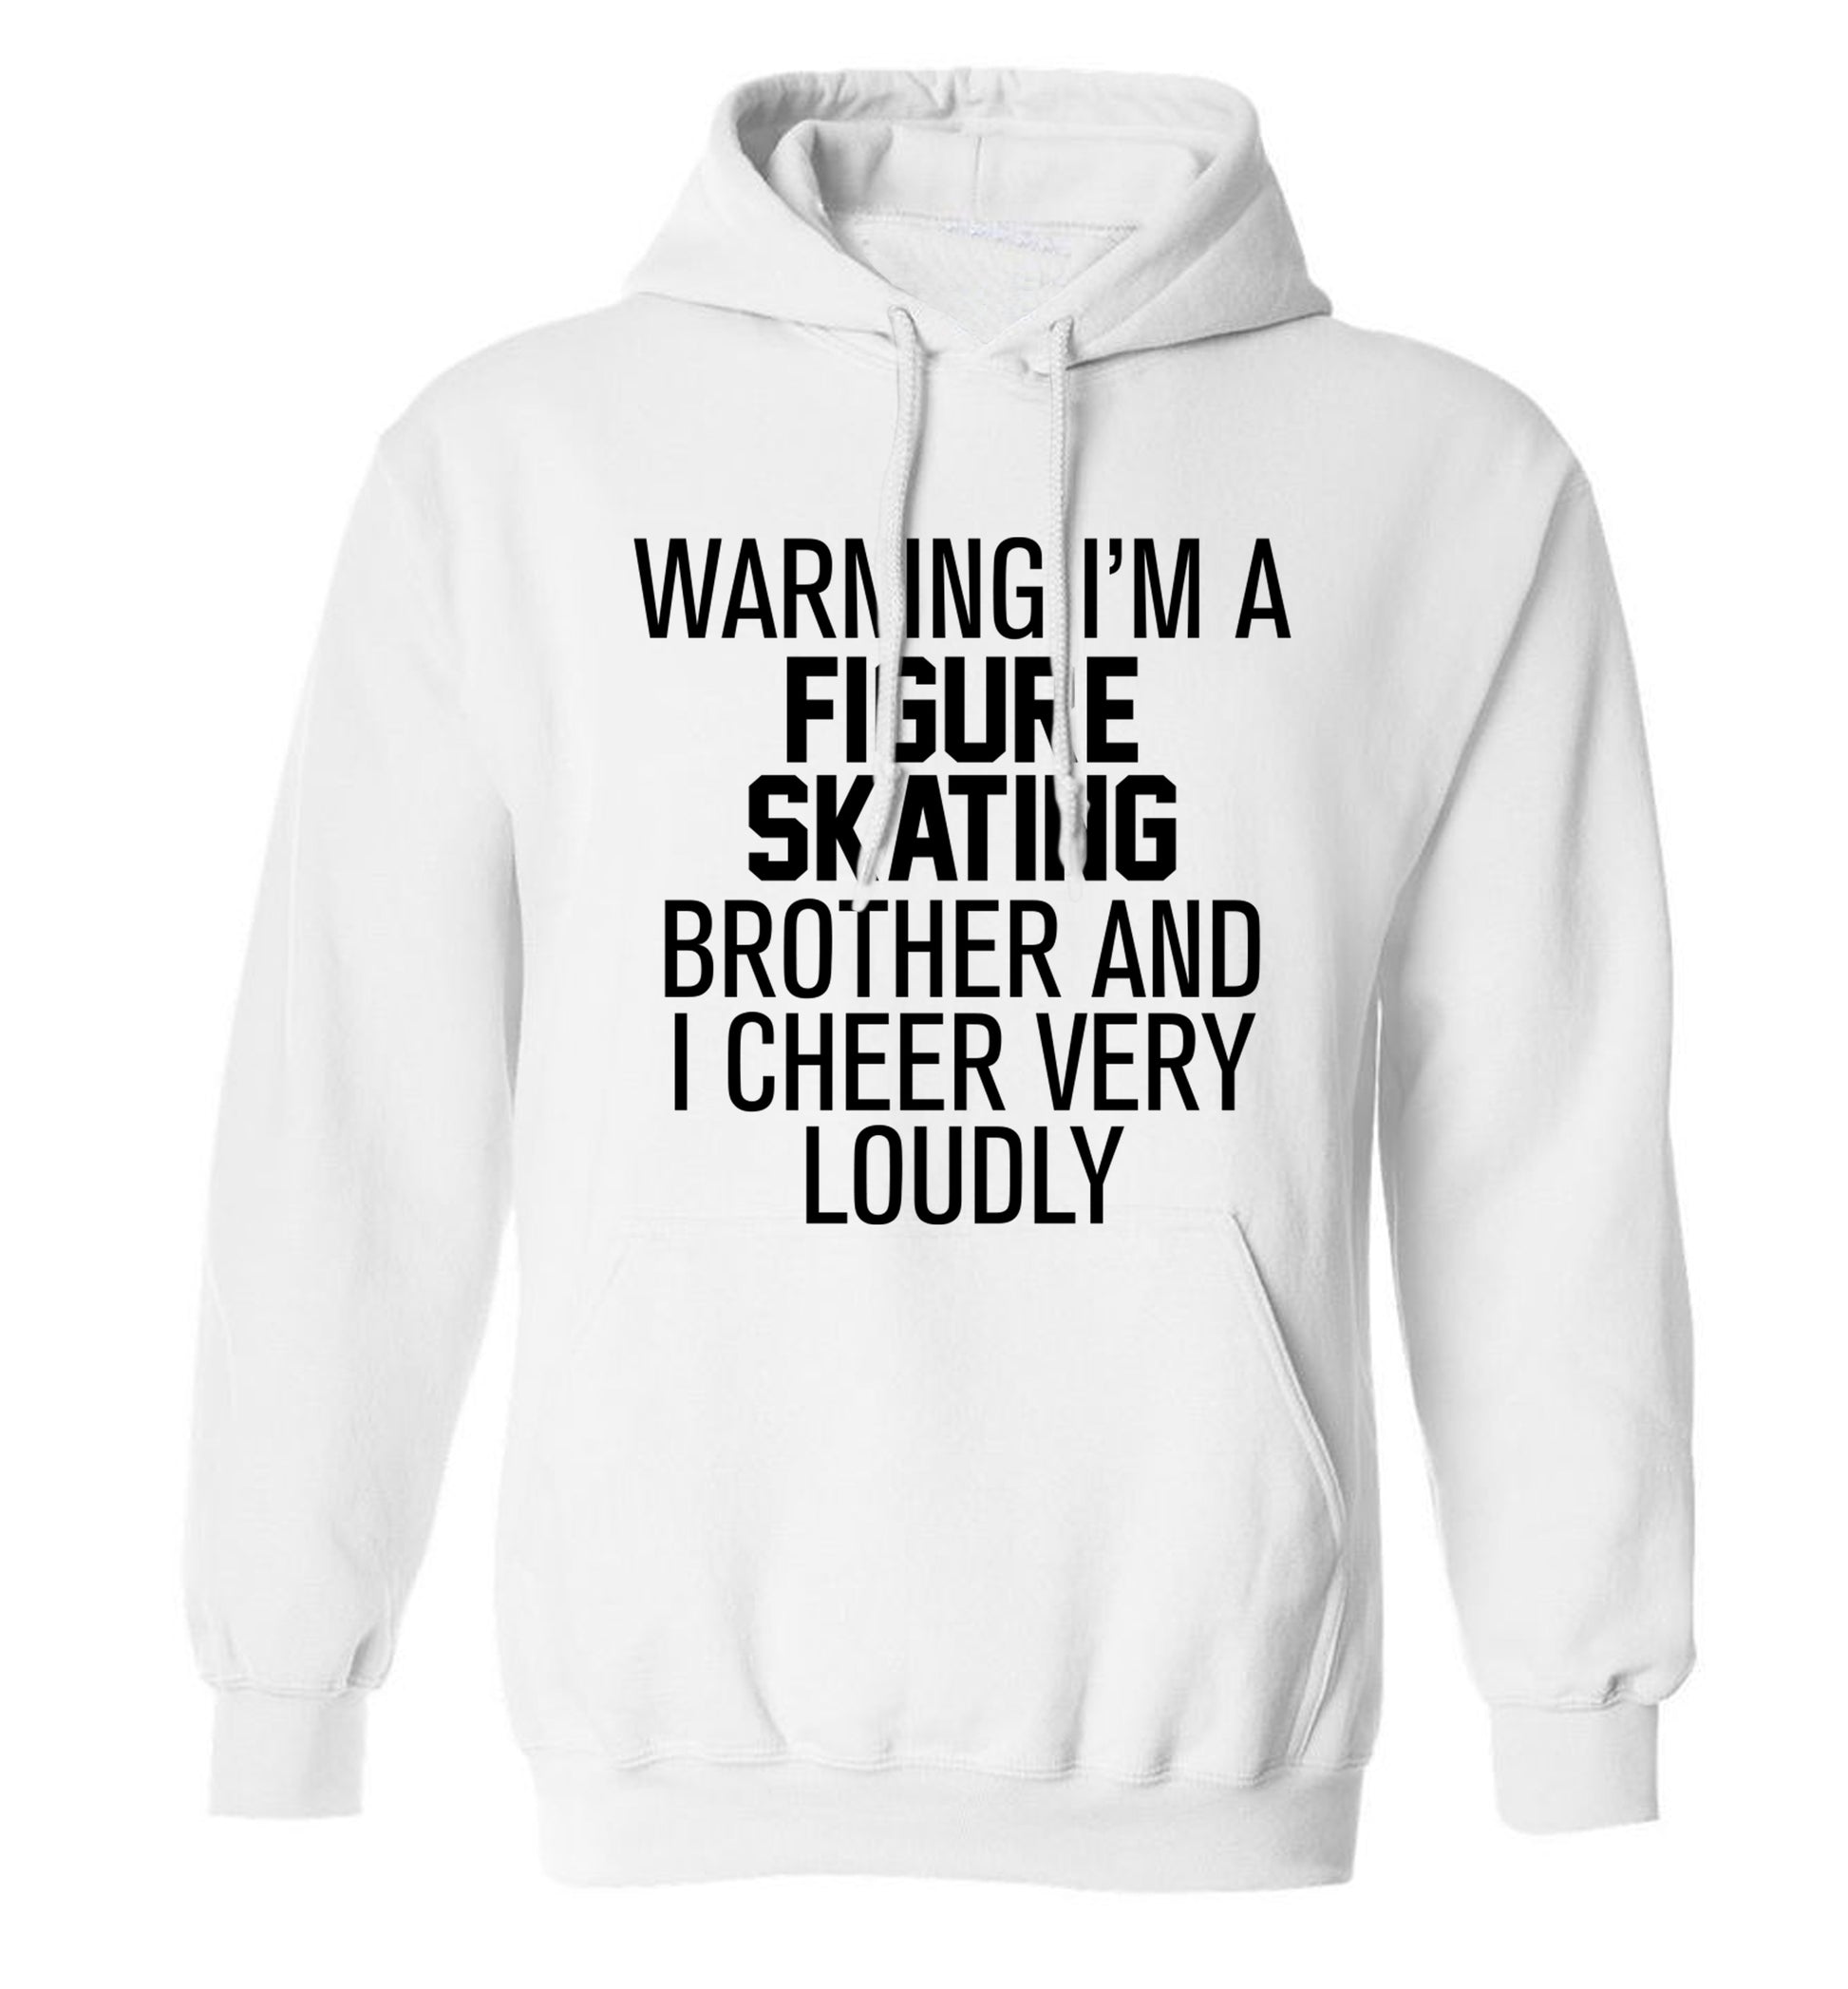 Warning I'm a figure skating brother and I cheer very loudly adults unisexwhite hoodie 2XL